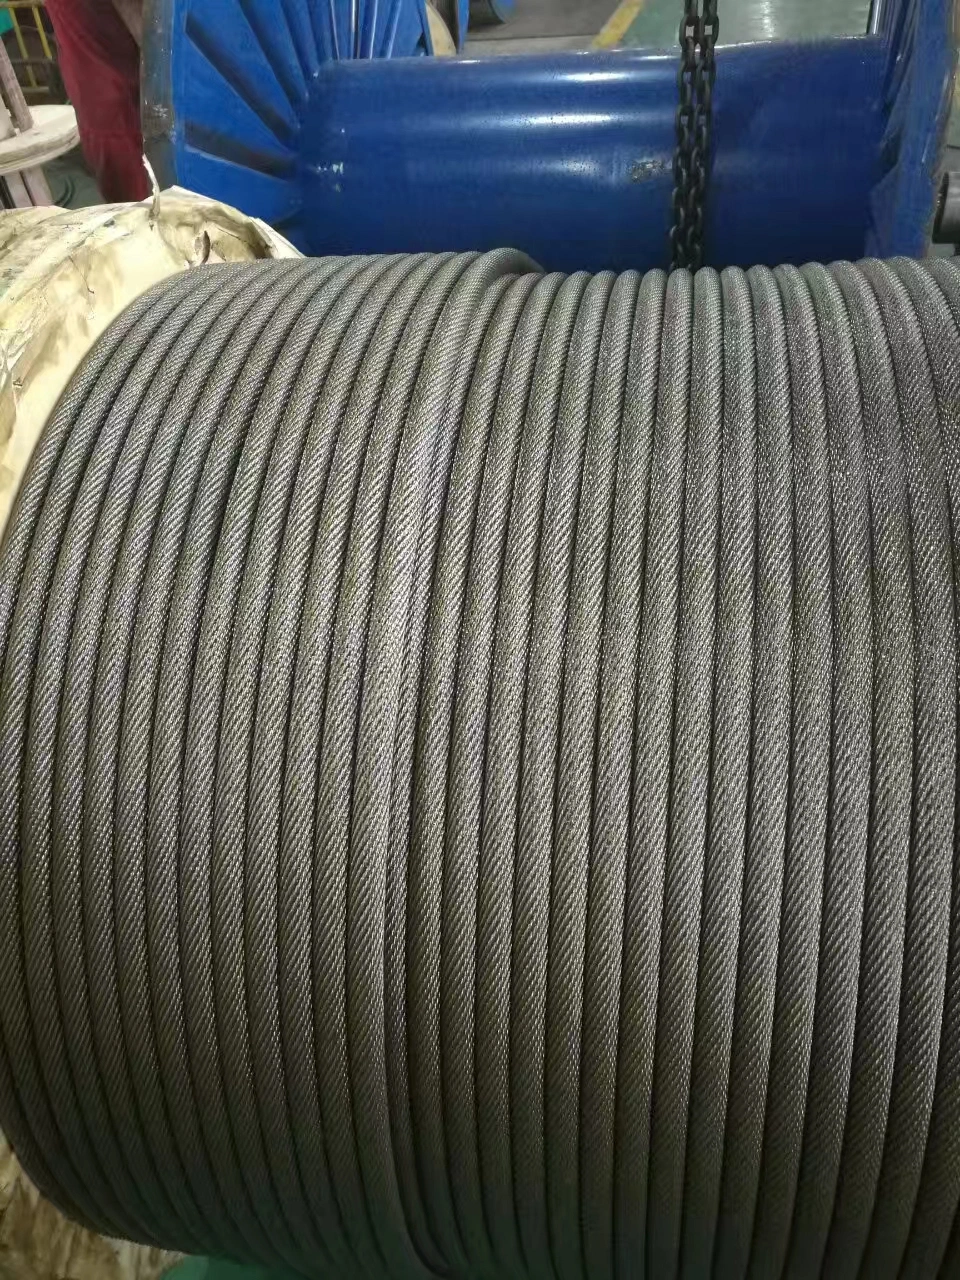 Rotation Resistant Steel Wire Rope 18X7, Distributors, Supplying Wire Rope